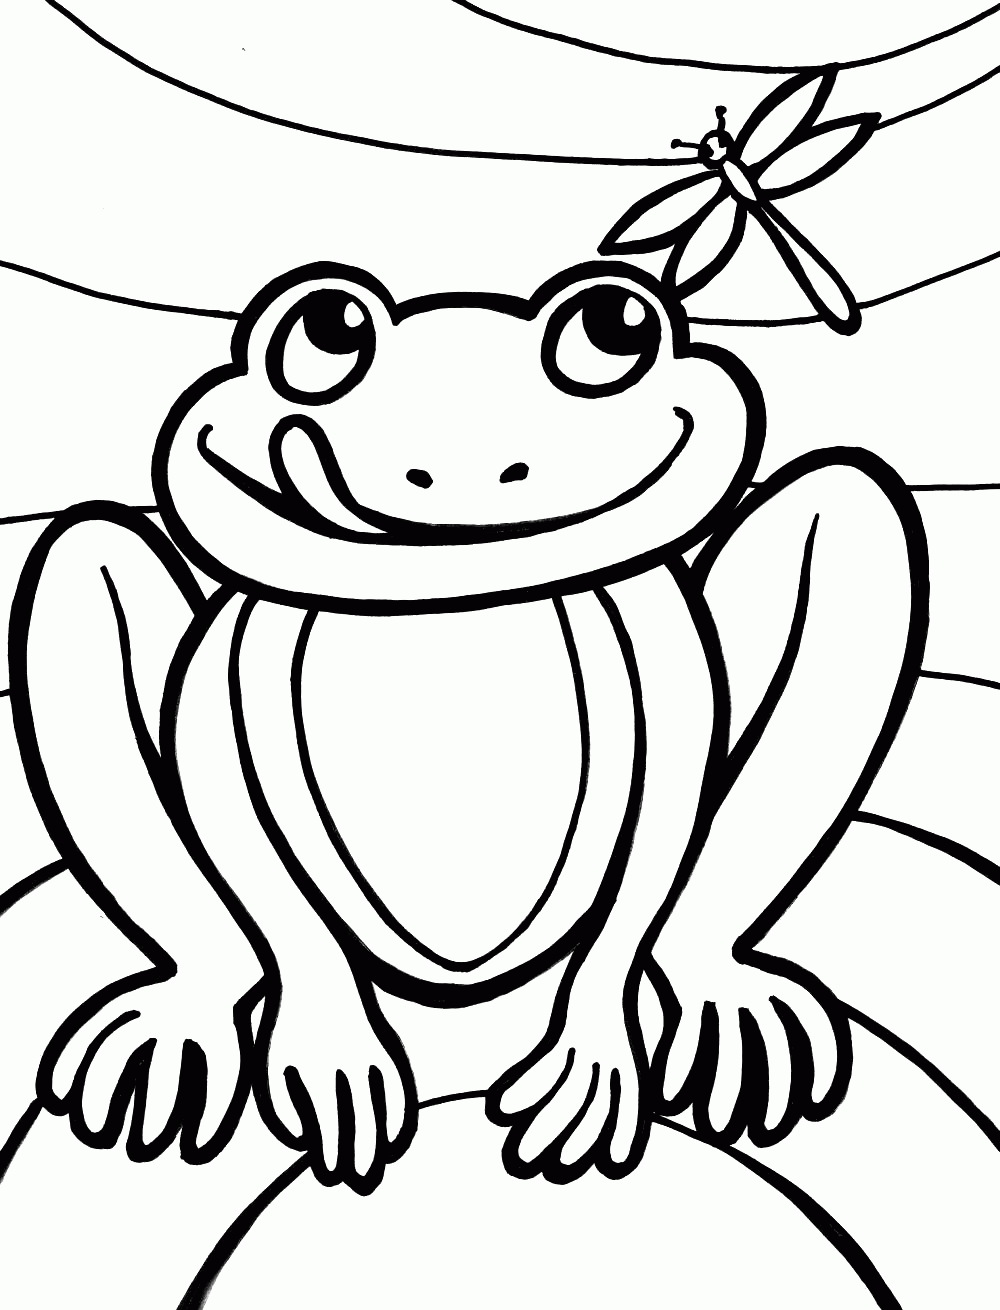 Frog Coloring Pages Free Frog Coloring Pages Frog And Toad ...